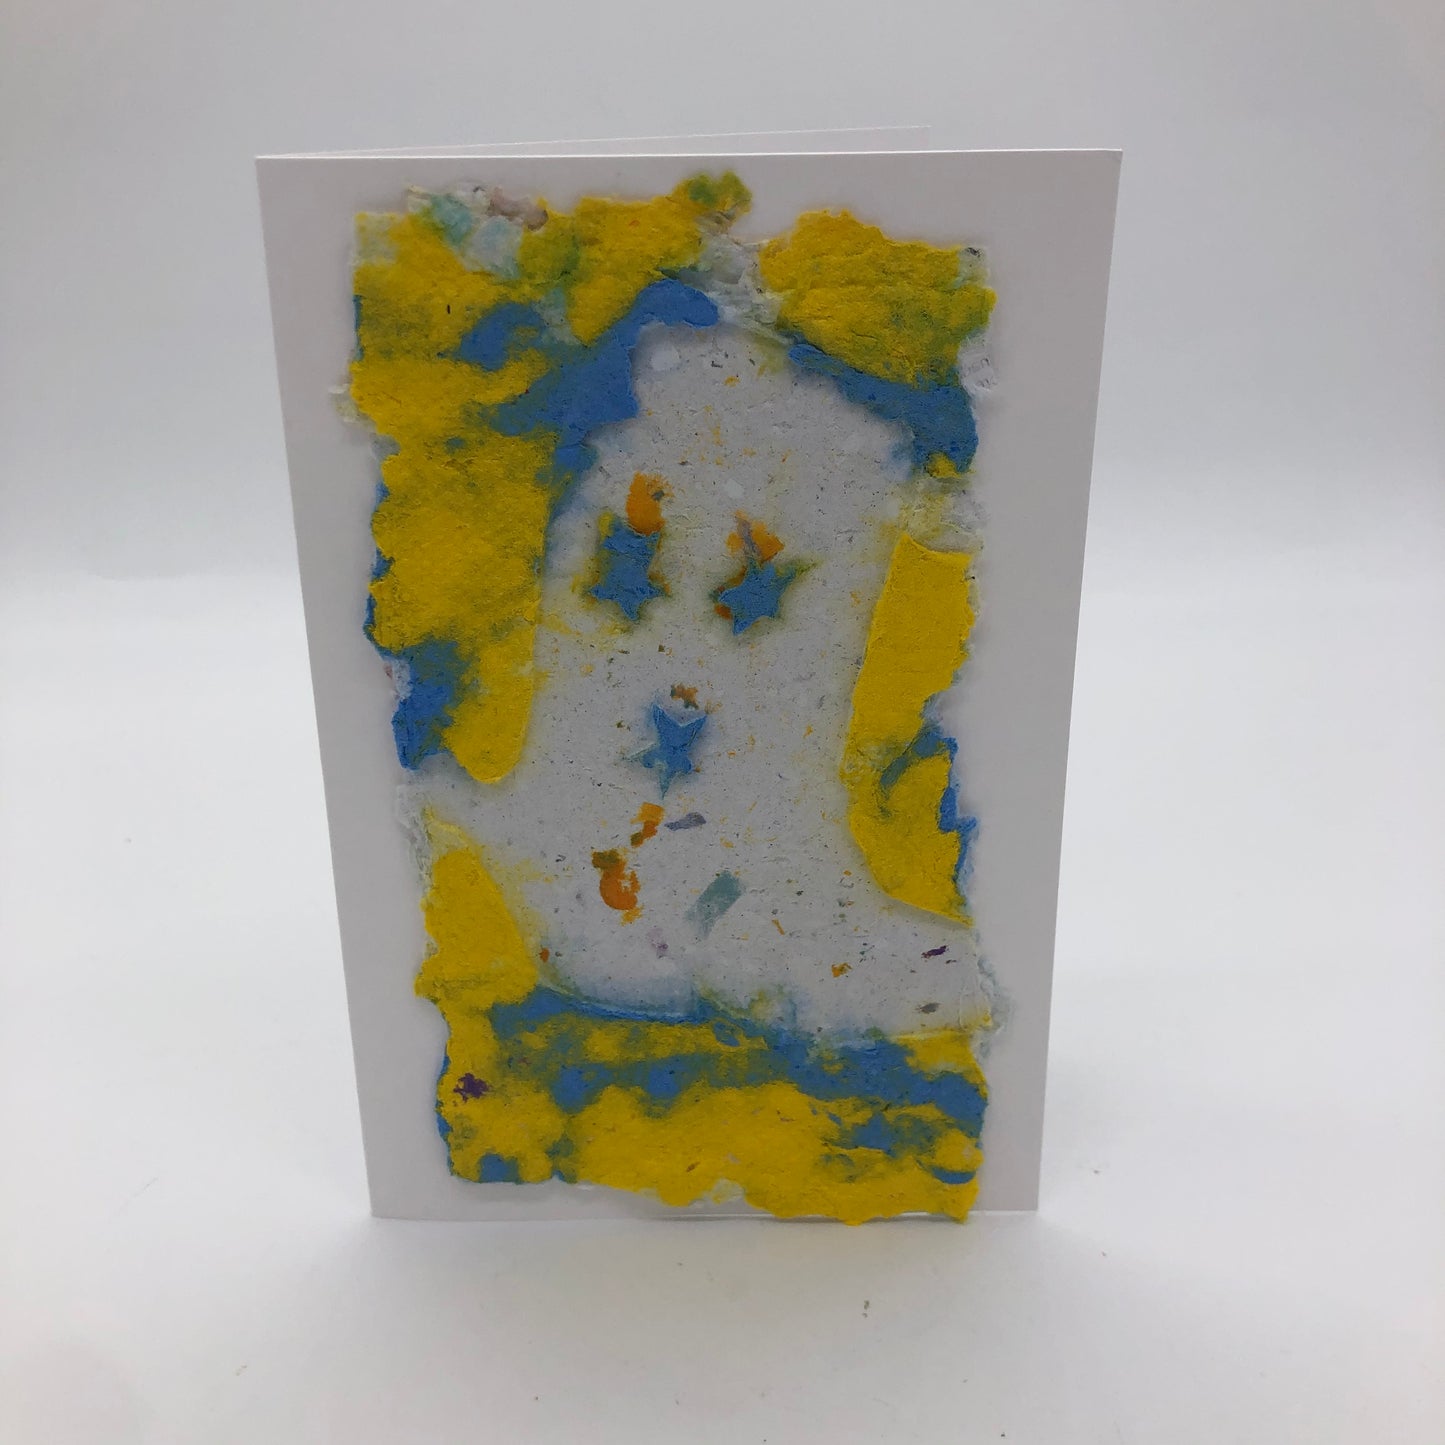 Handmade paper greeting card made in yellow and blue.  On top of card is a white cowboy boot with three blue stars.